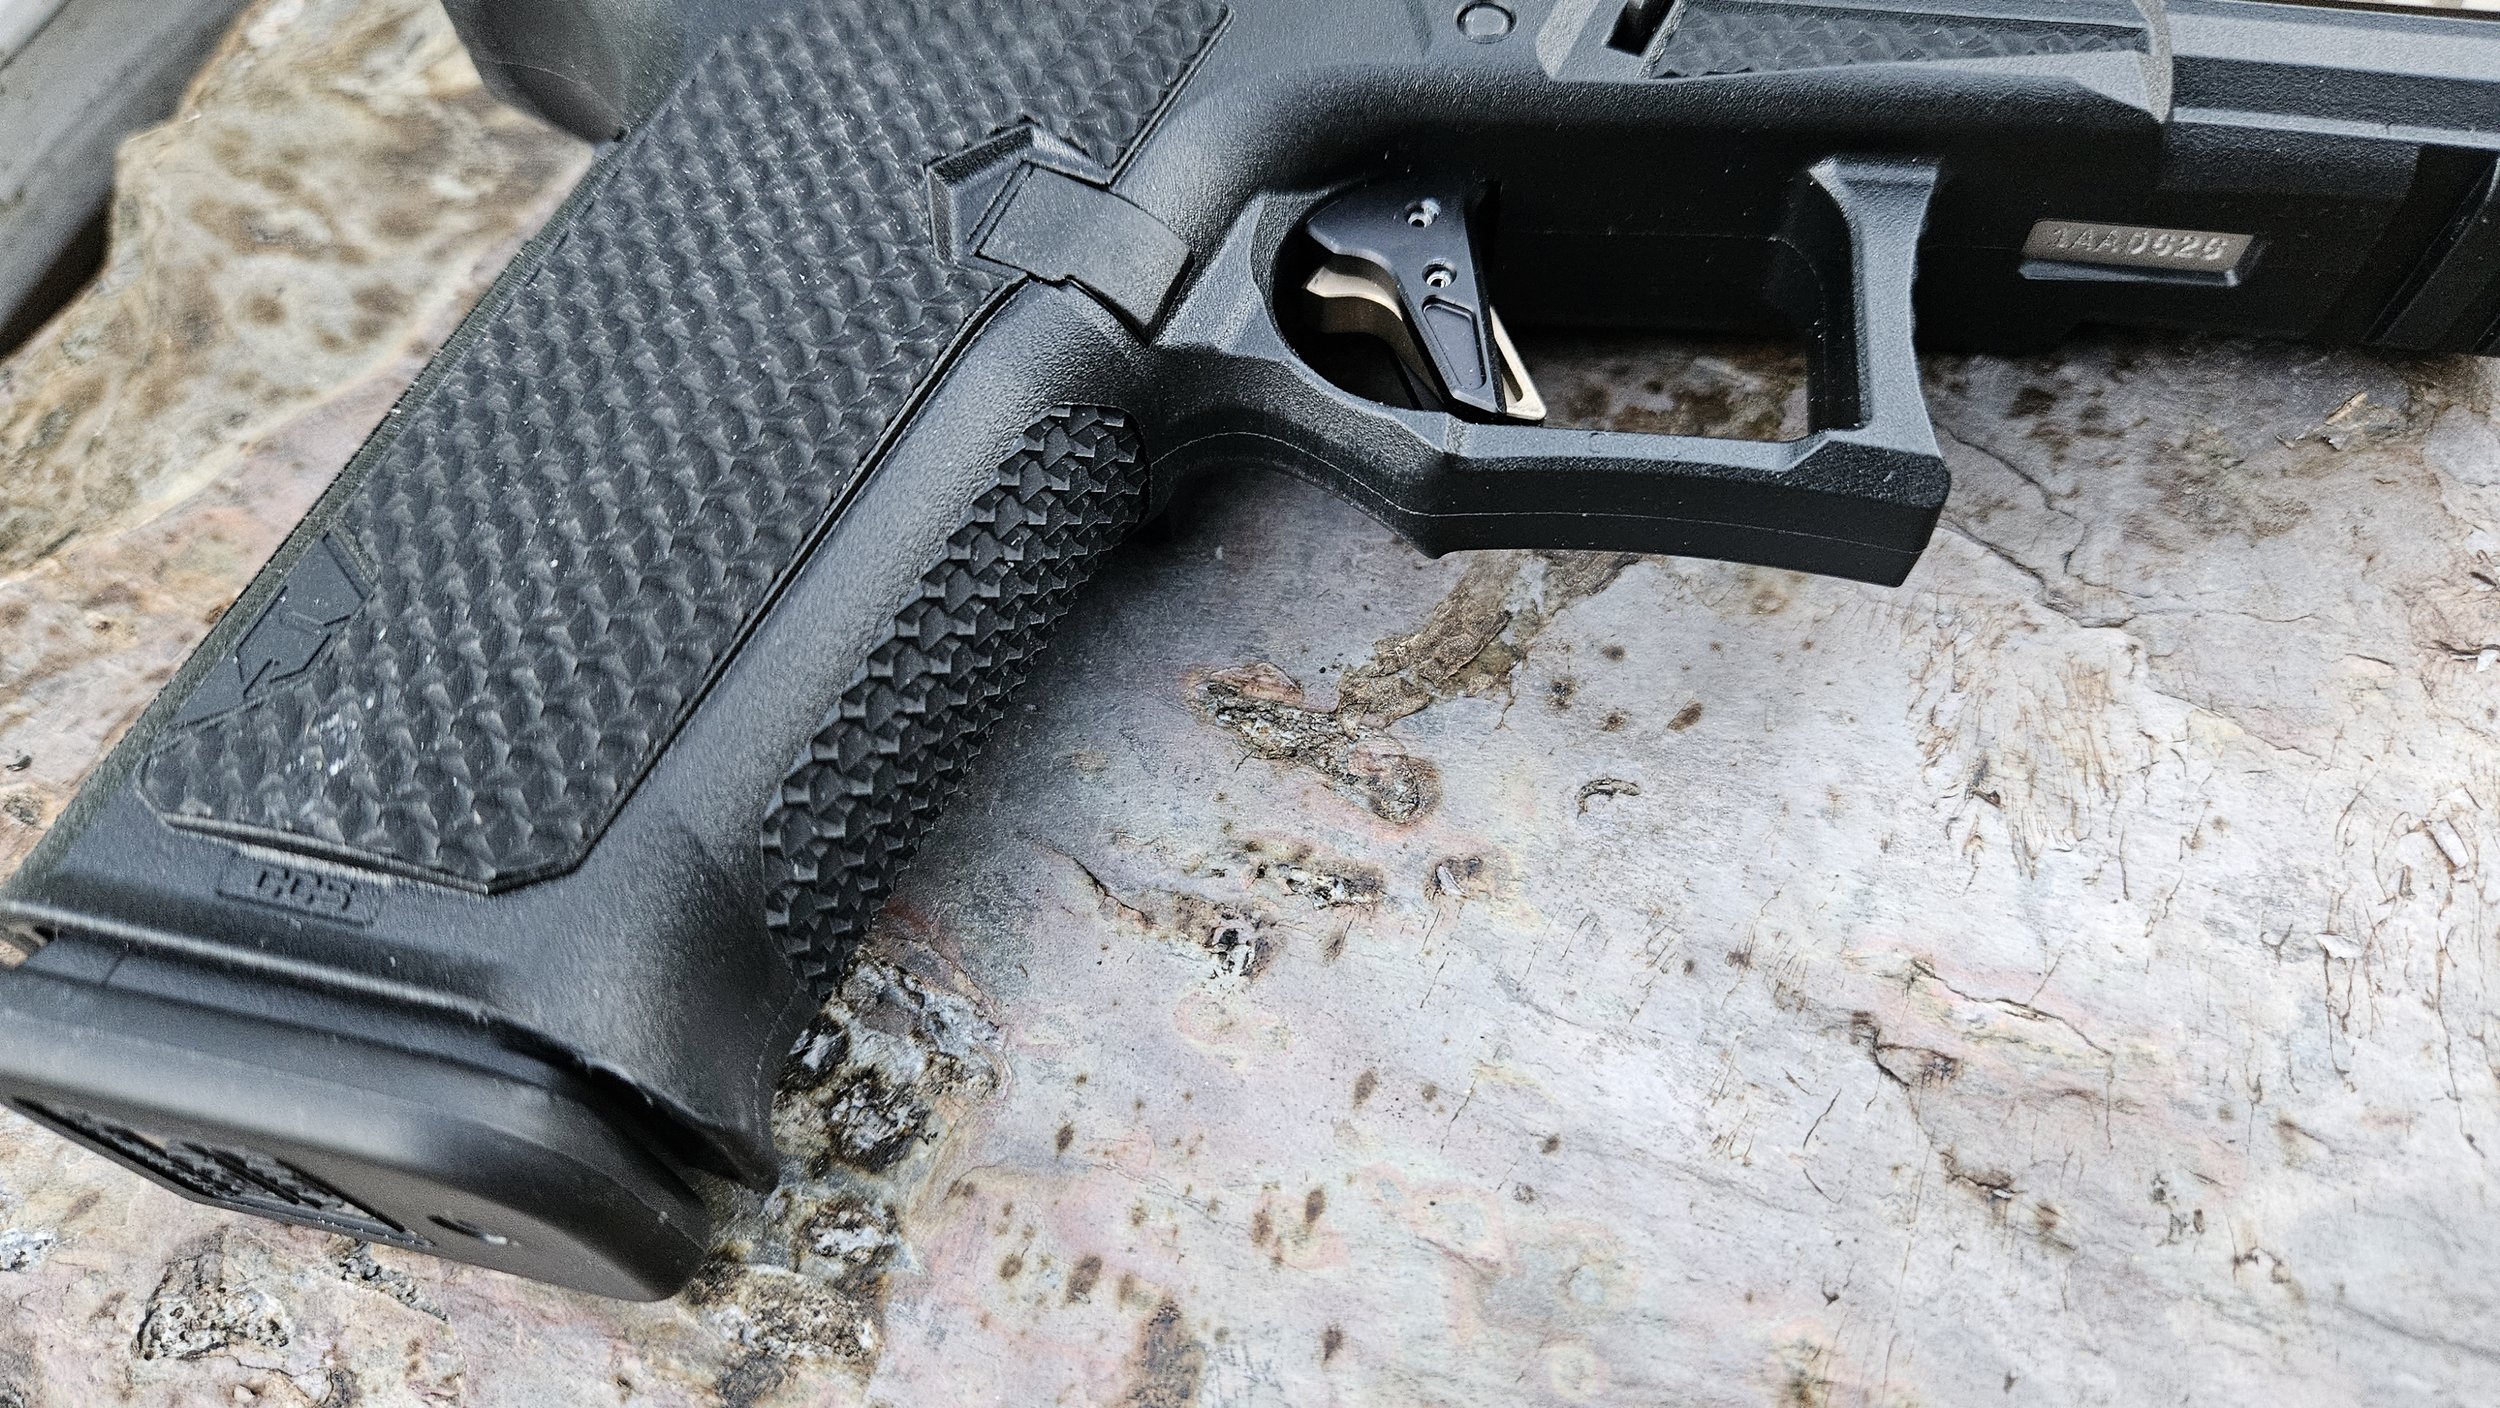 How to Install Glock Night Sights (Without a Sight Pusher Tool) - Pew Pew  Tactical